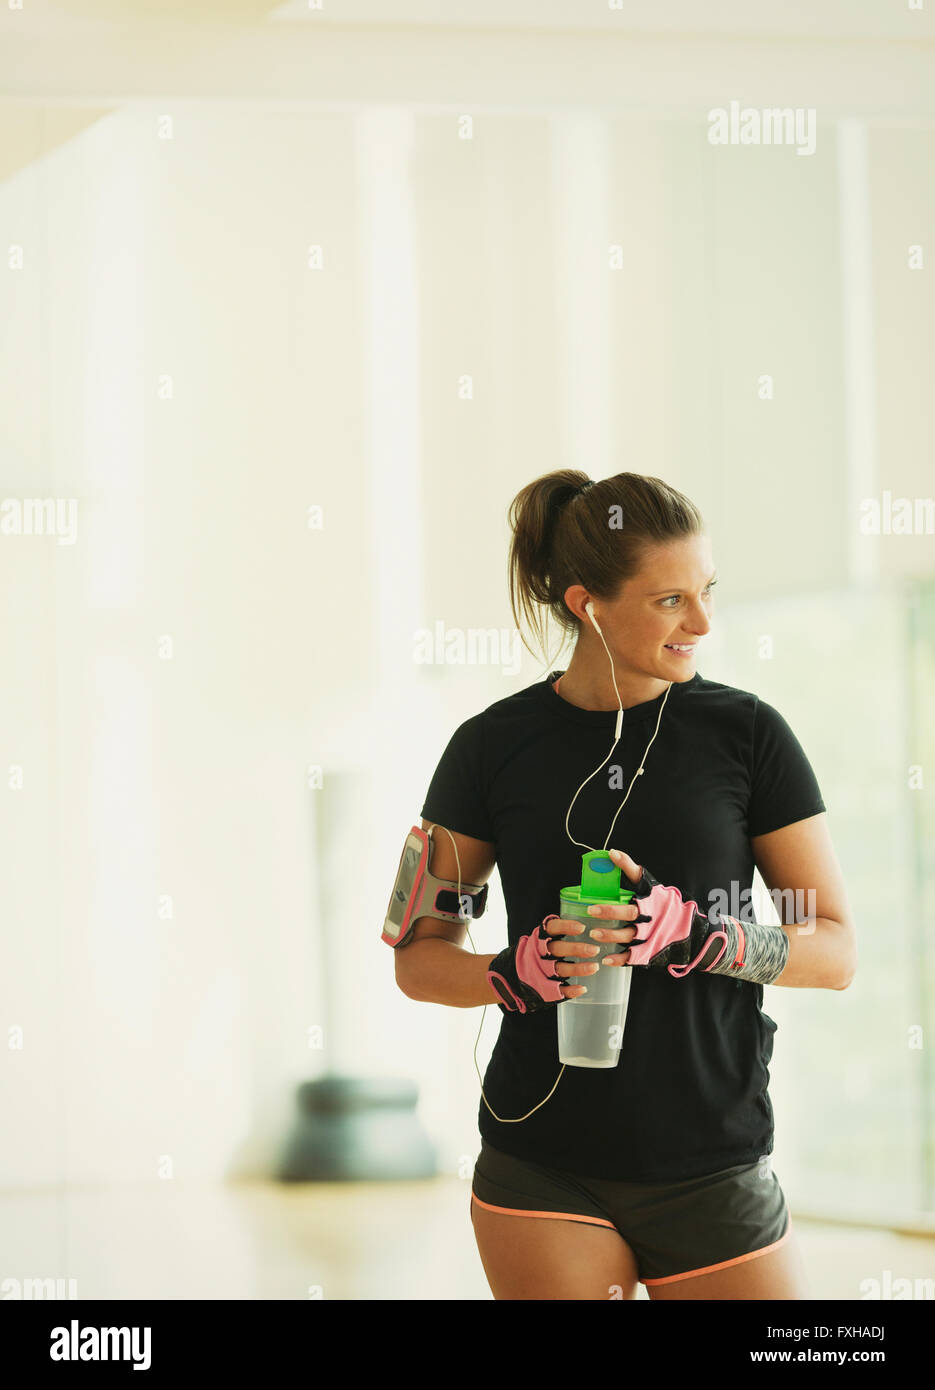 Smiling woman drinking water in gym studio Banque D'Images